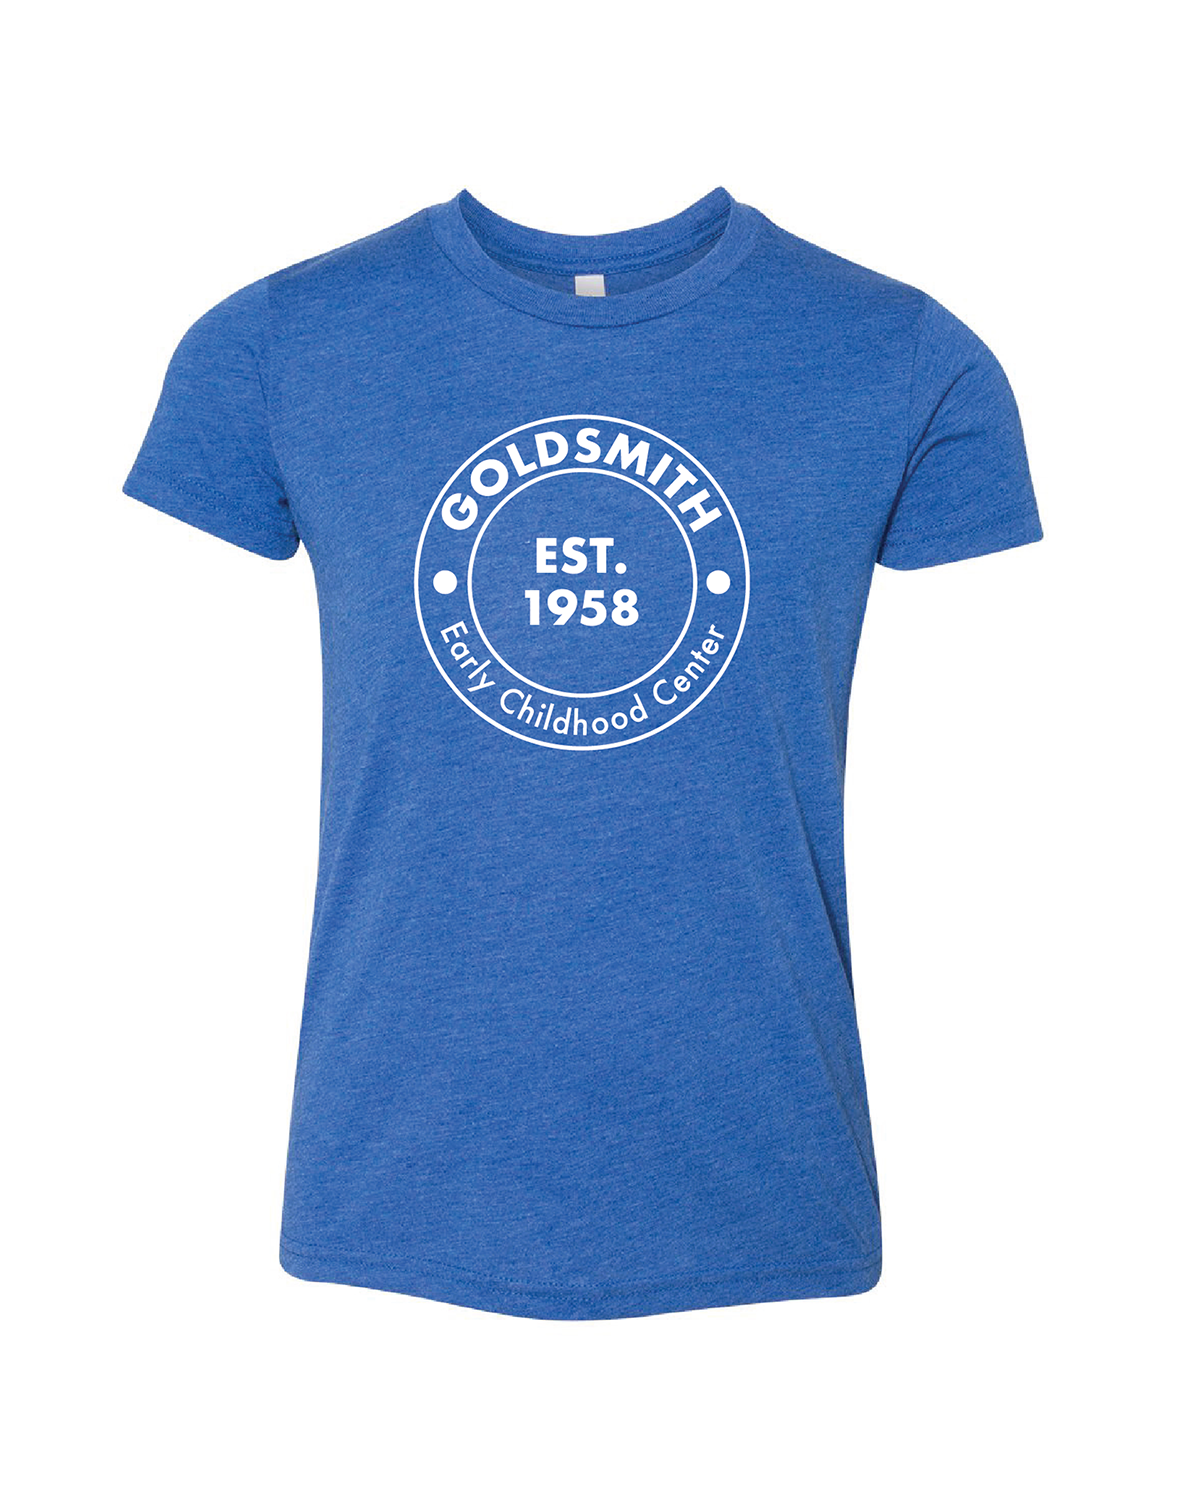 Adult Tri-Blend Short Sleeved with Round Logo